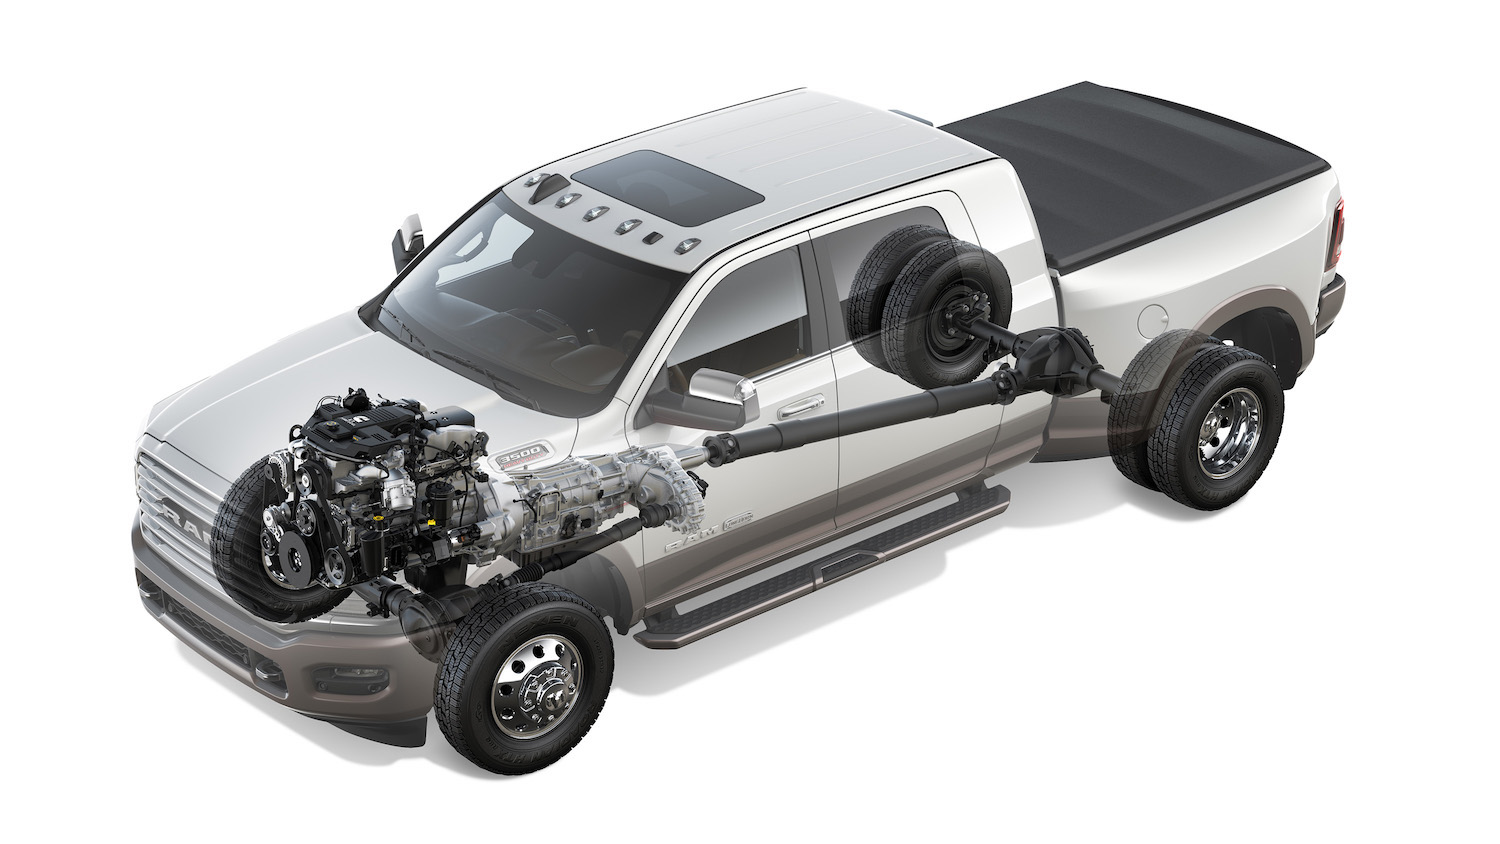 Cutaway of a white Ram truck illustrating its turbo diesel Cummins I6 powertrain, which will soon have to compete with a 500 horsepower gasoline I6.